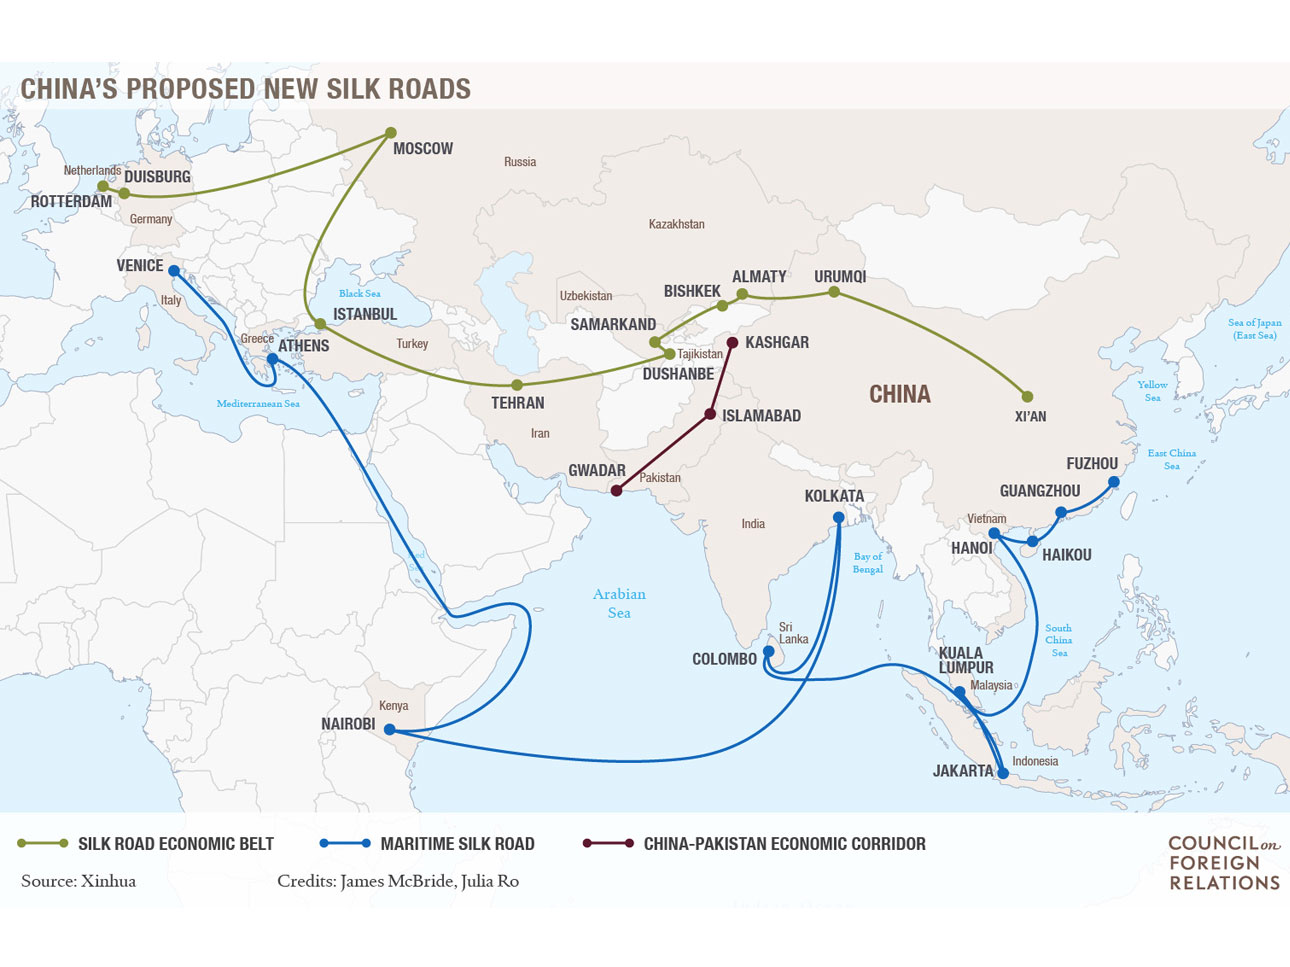 A map showing China's new silk roads.